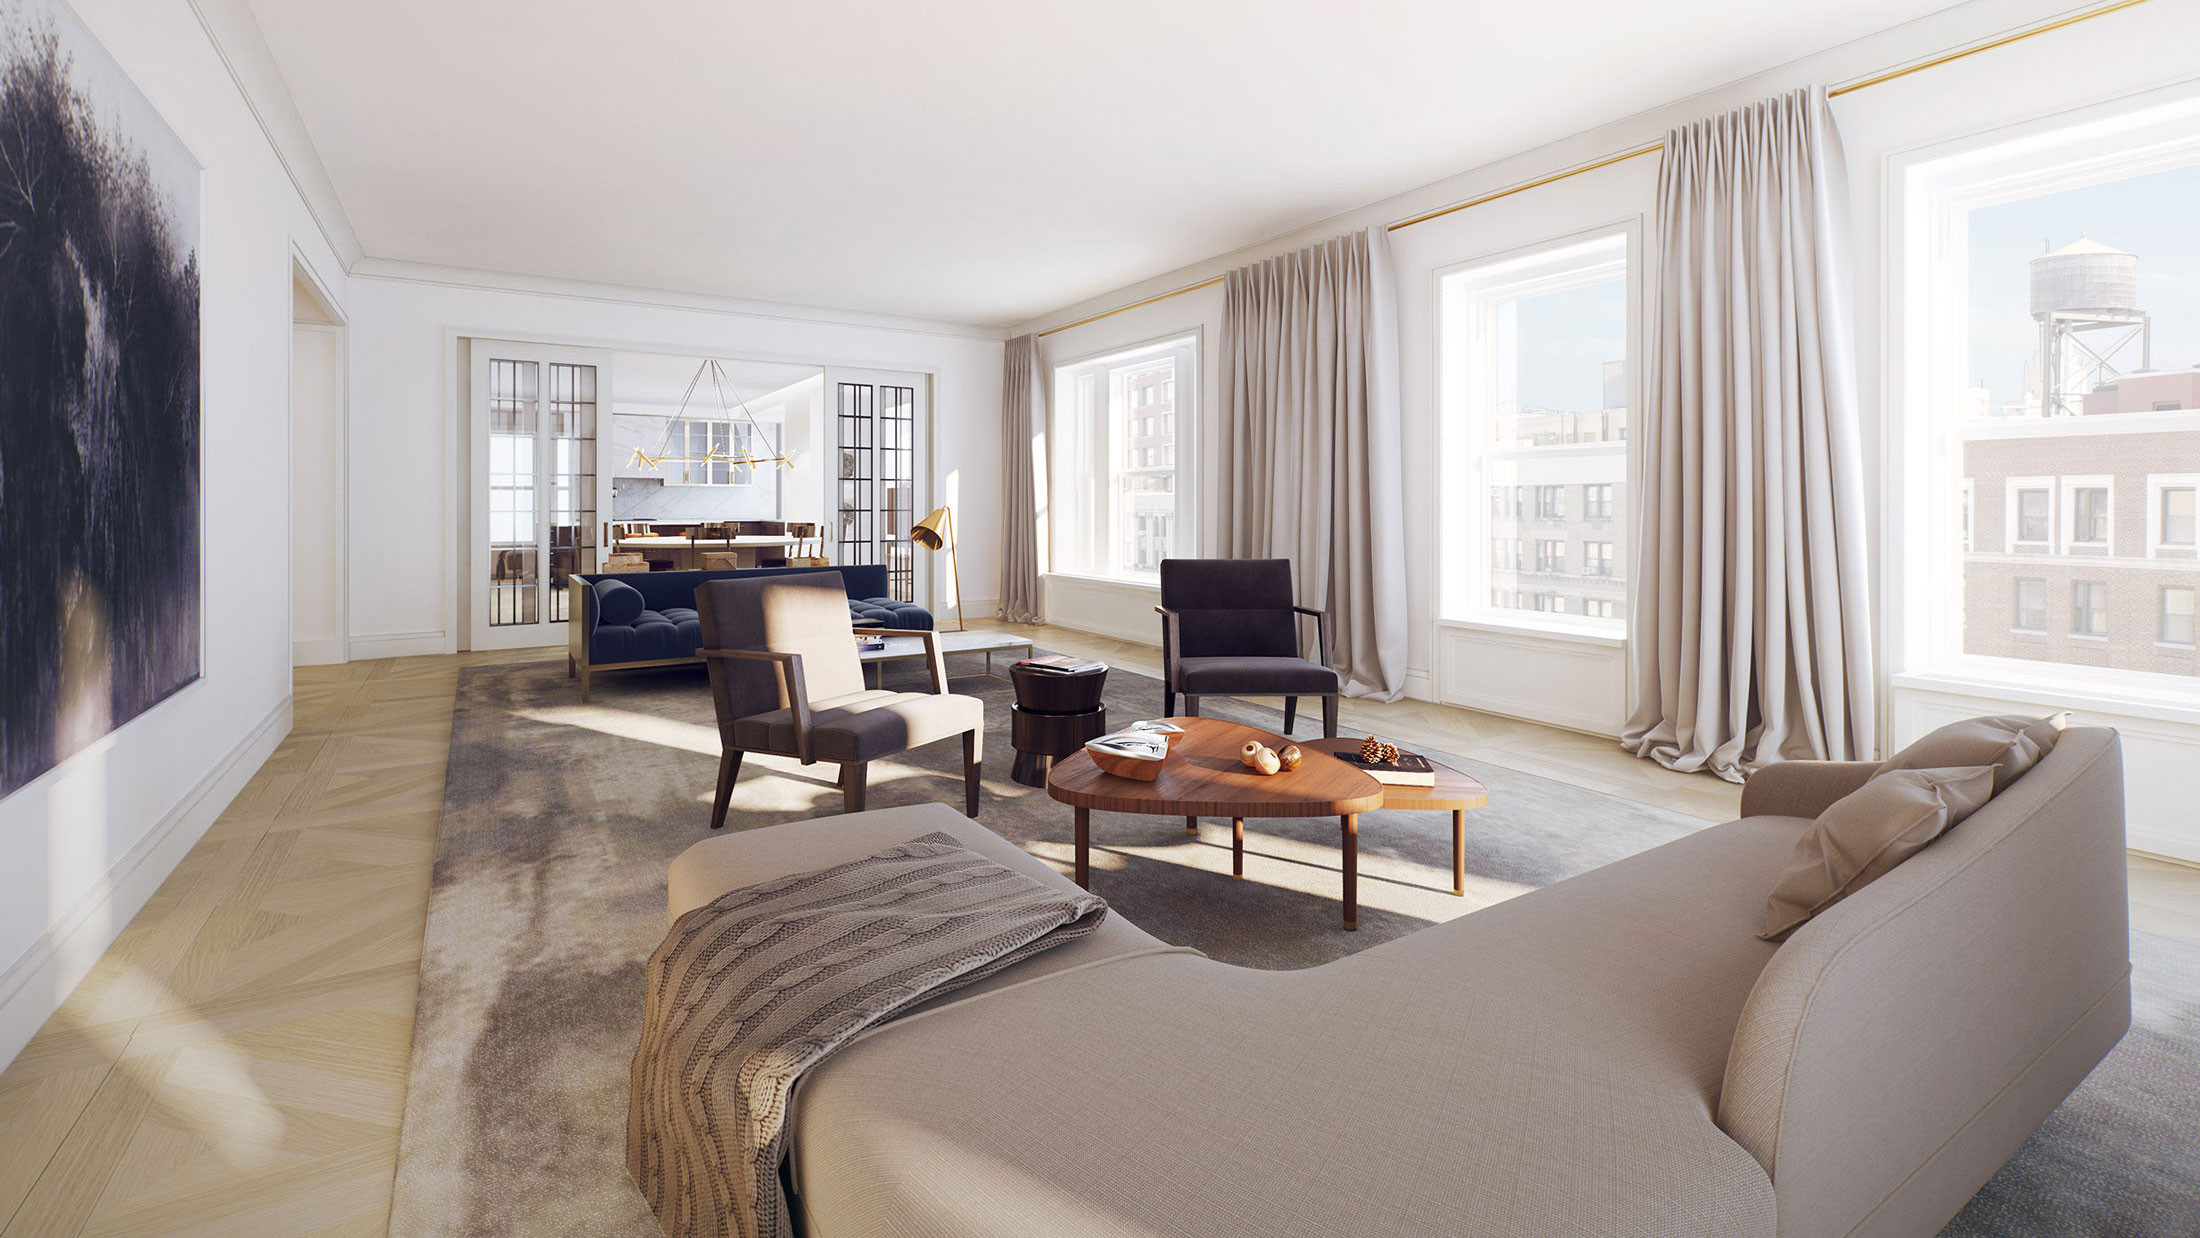 Architectural Rendering of the interior of the 498 West End Avenue project located on the Upper West Side, New York City